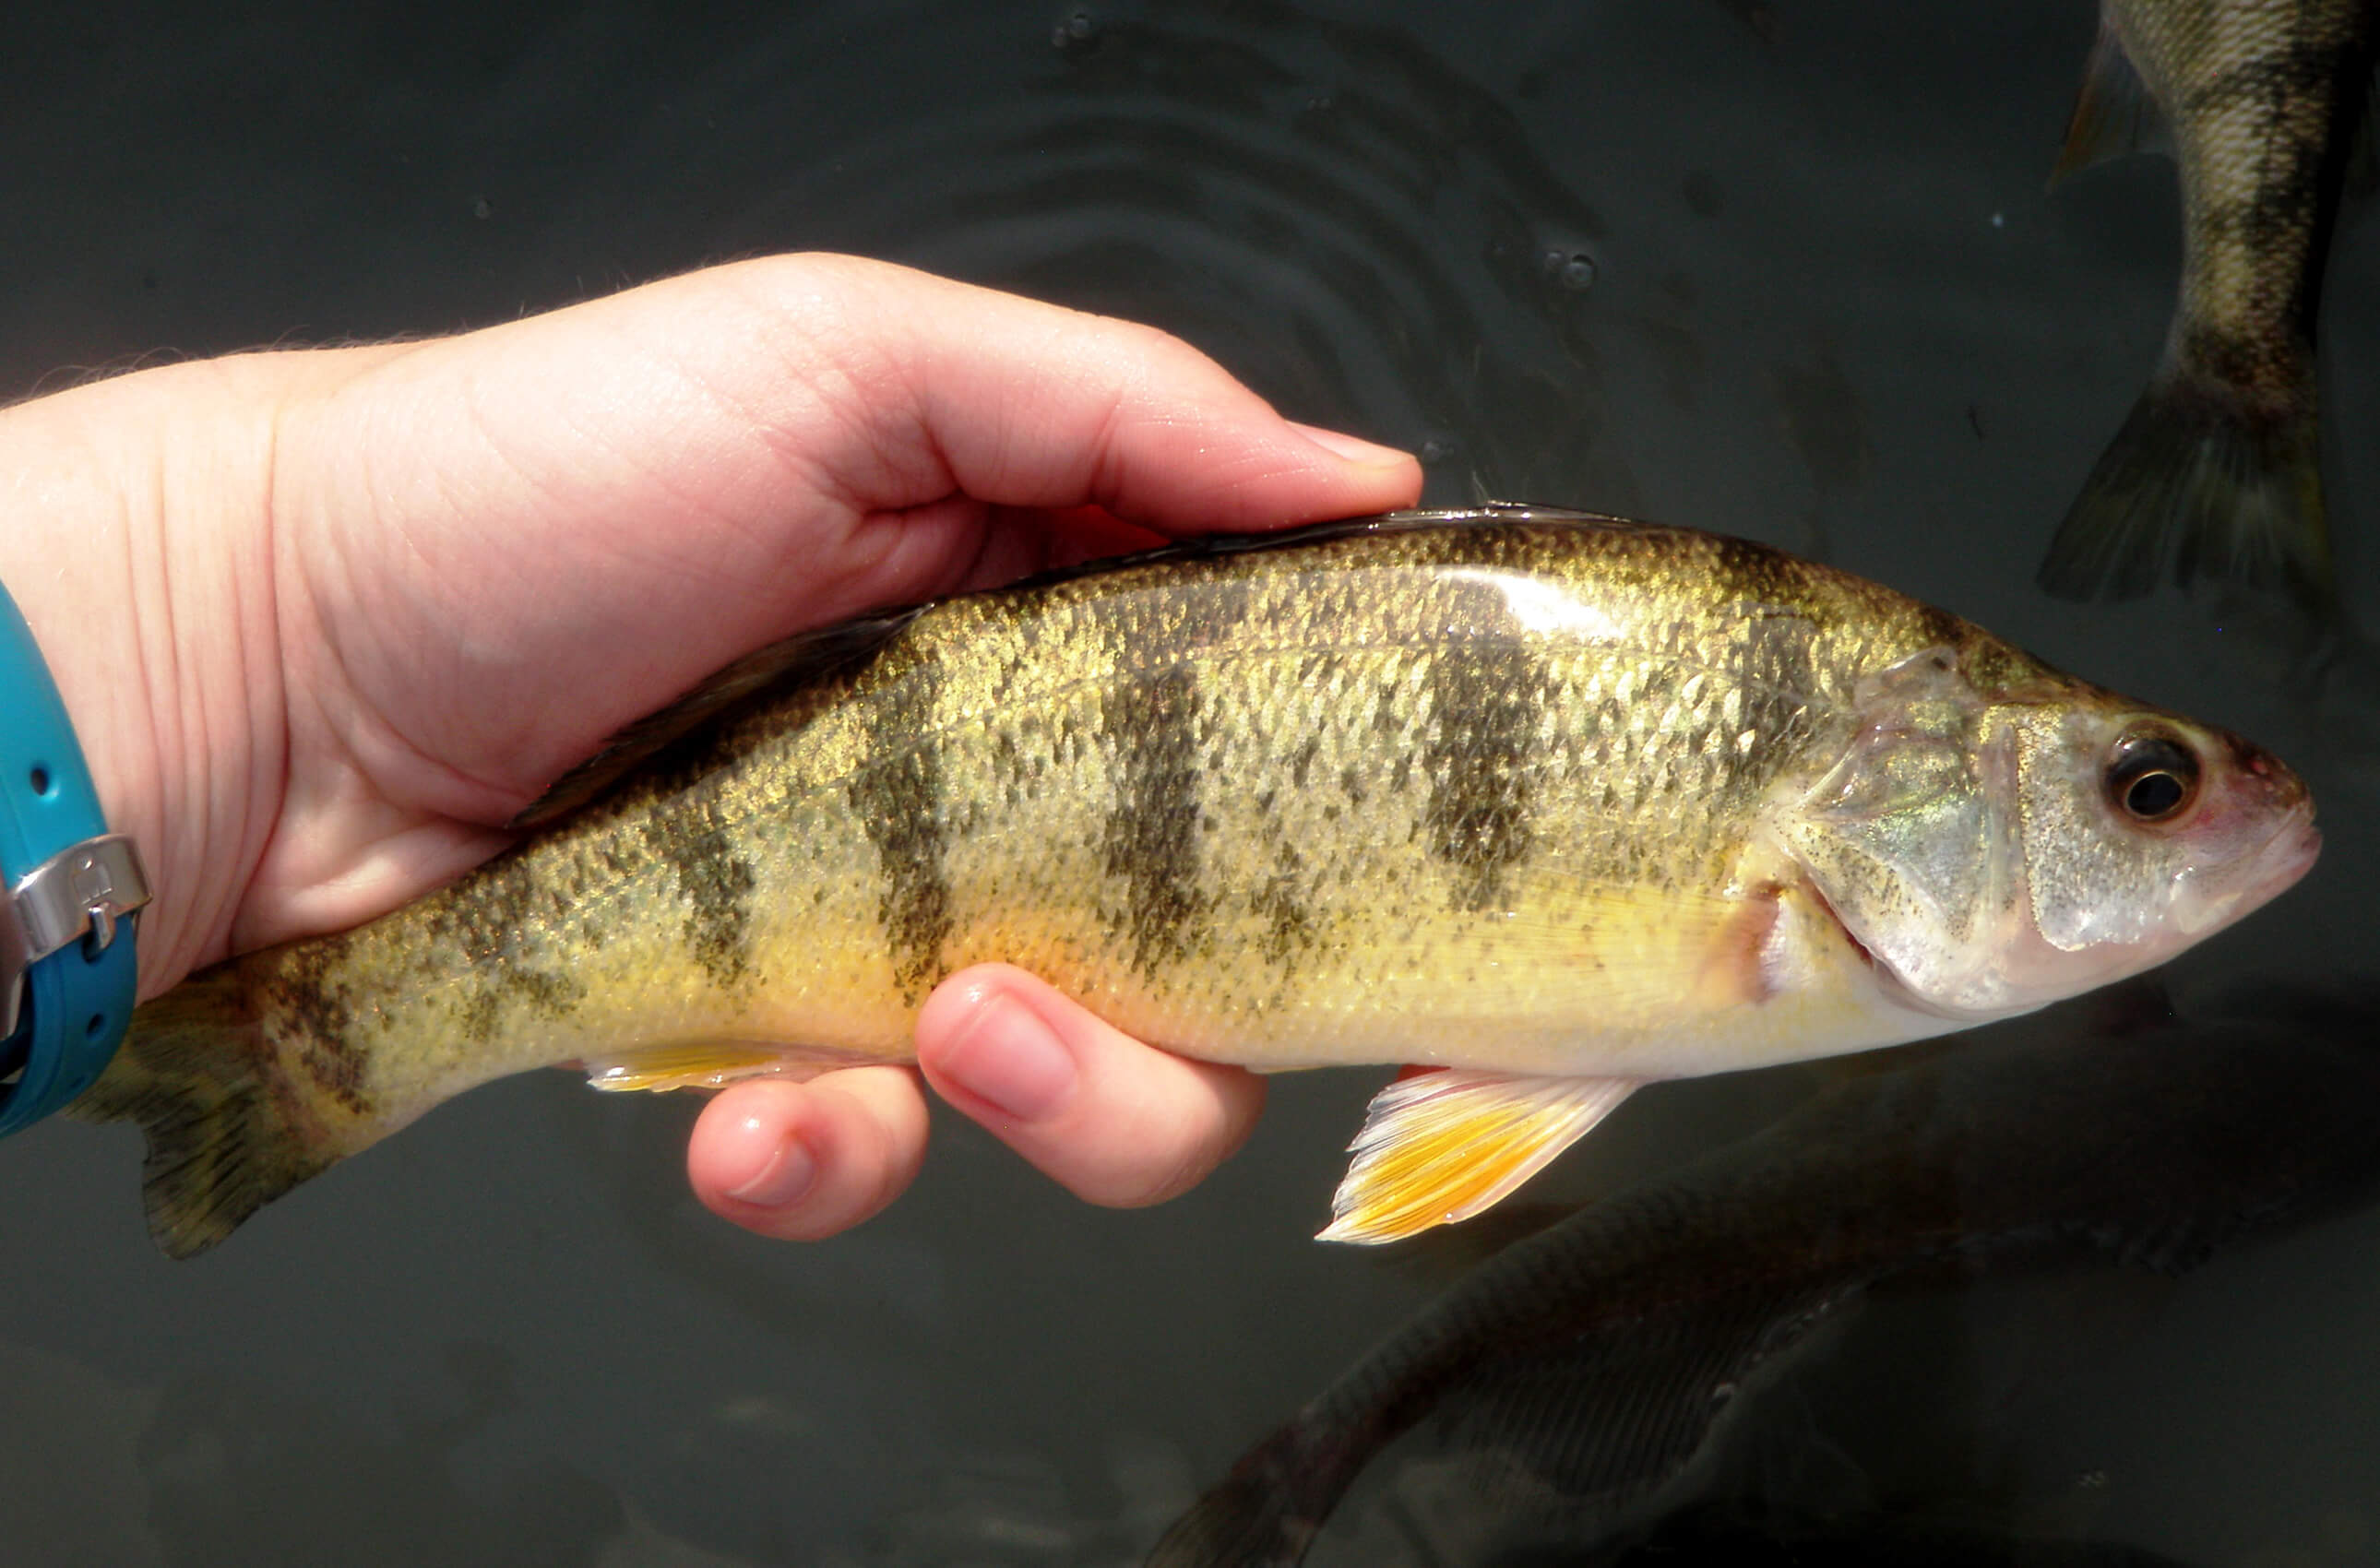 Surprise finding: Lake Michigan perch quickly changed course of